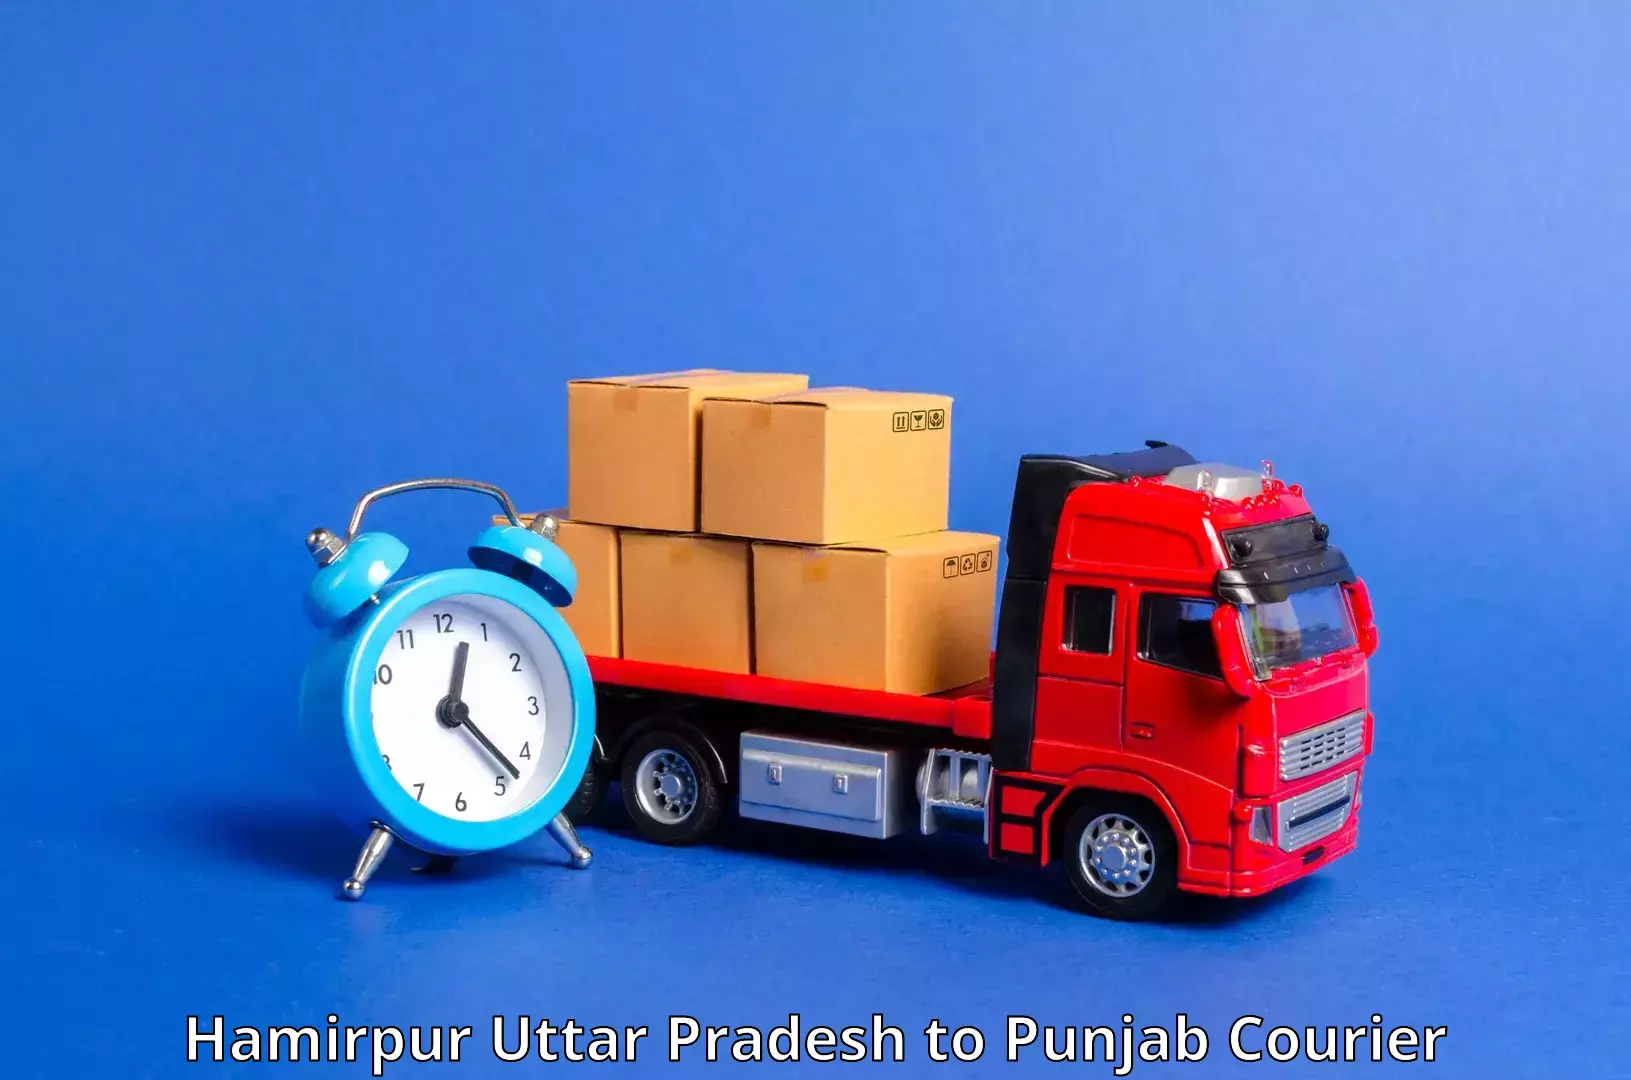 Business delivery service Hamirpur Uttar Pradesh to Pathankot